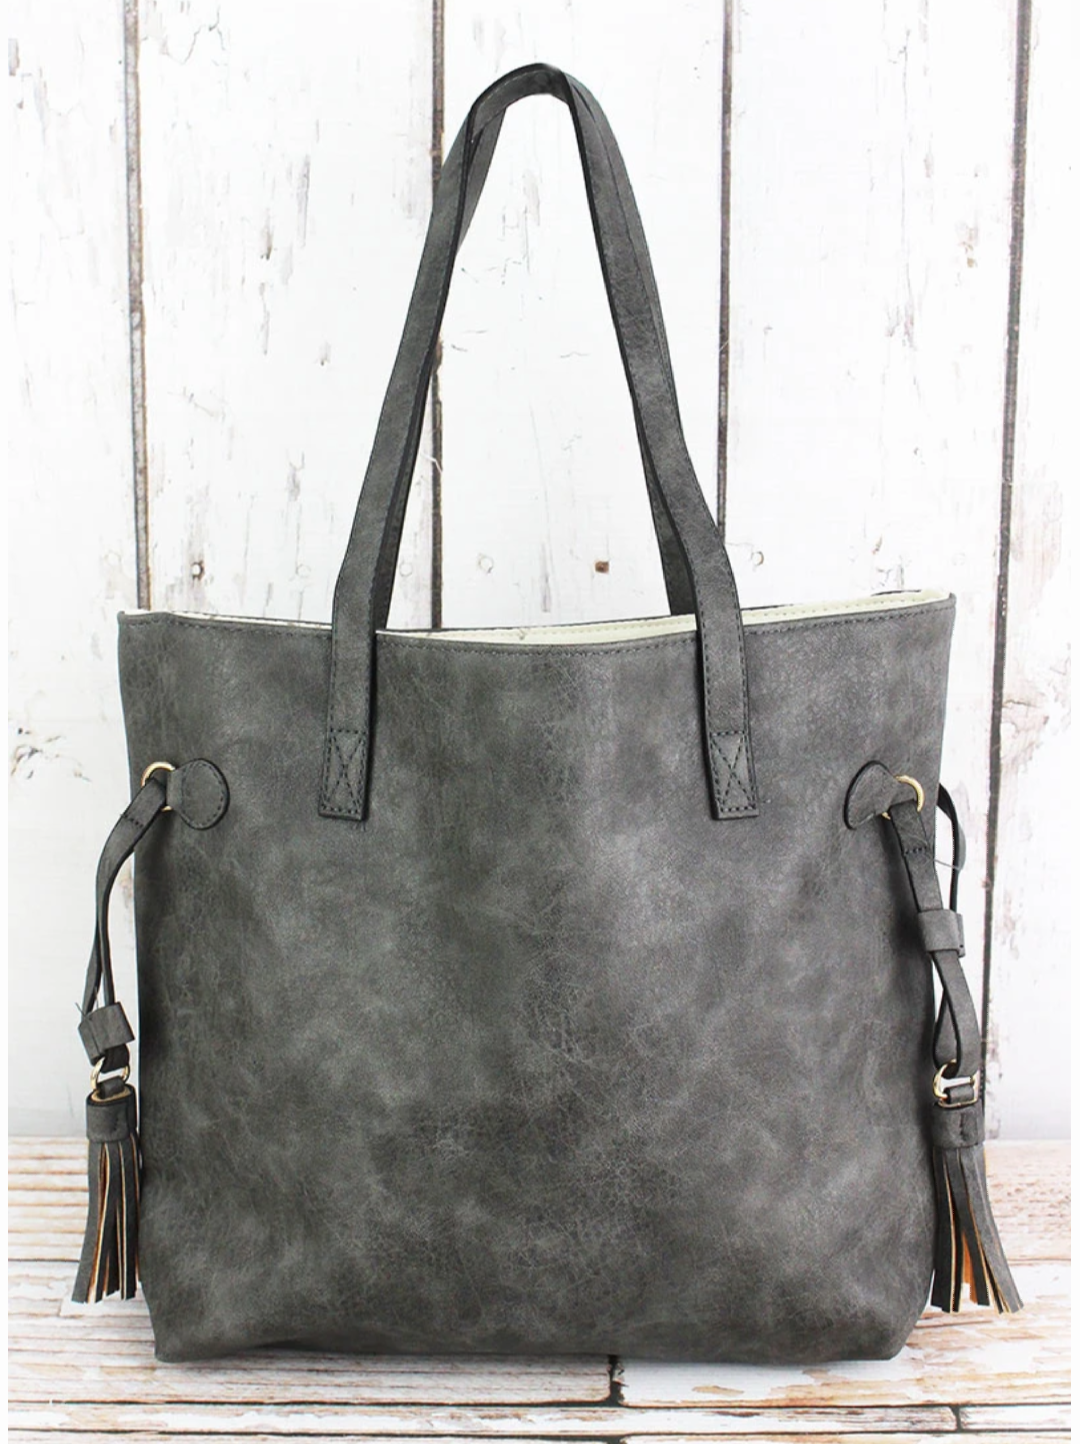 Grey leather tote